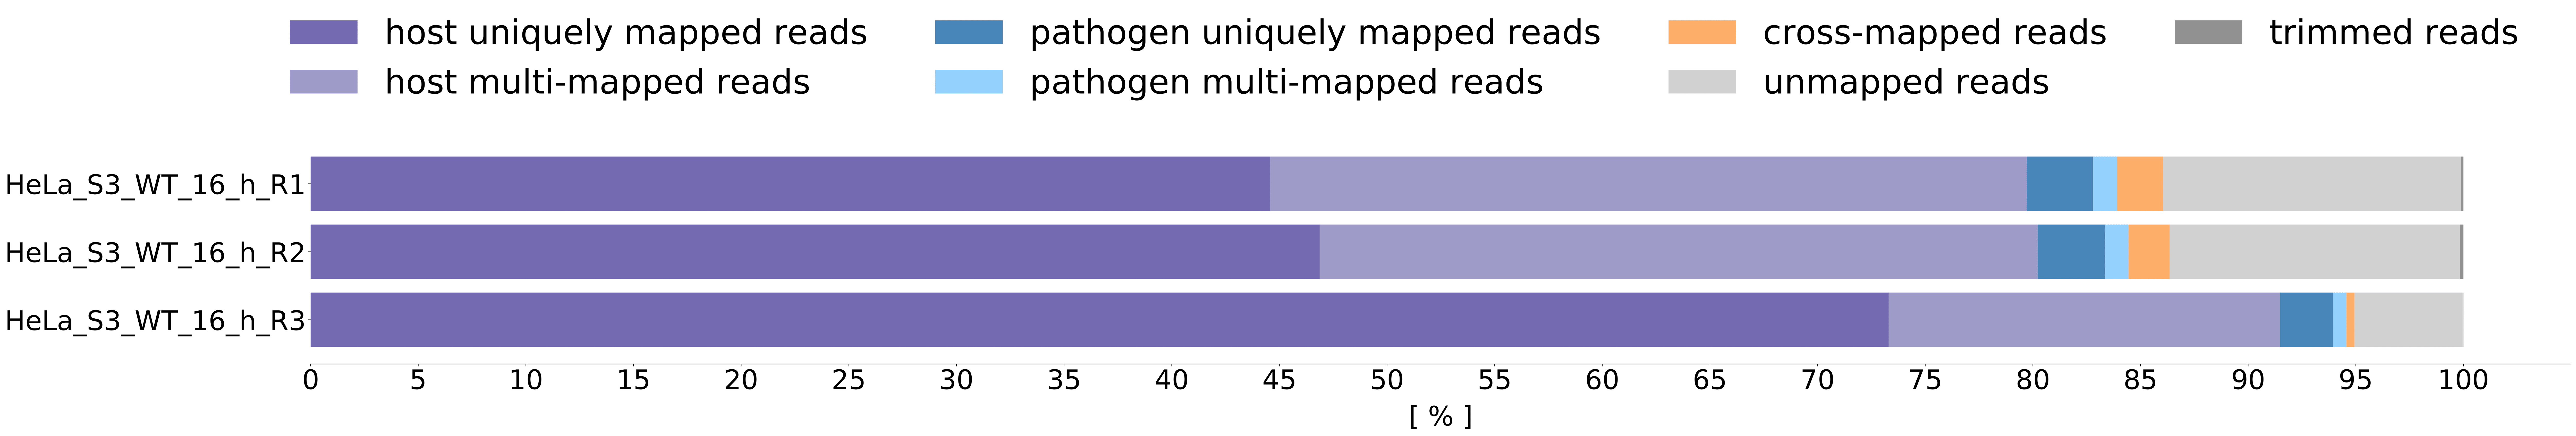 mapping_stats_samples_percentage_star.png